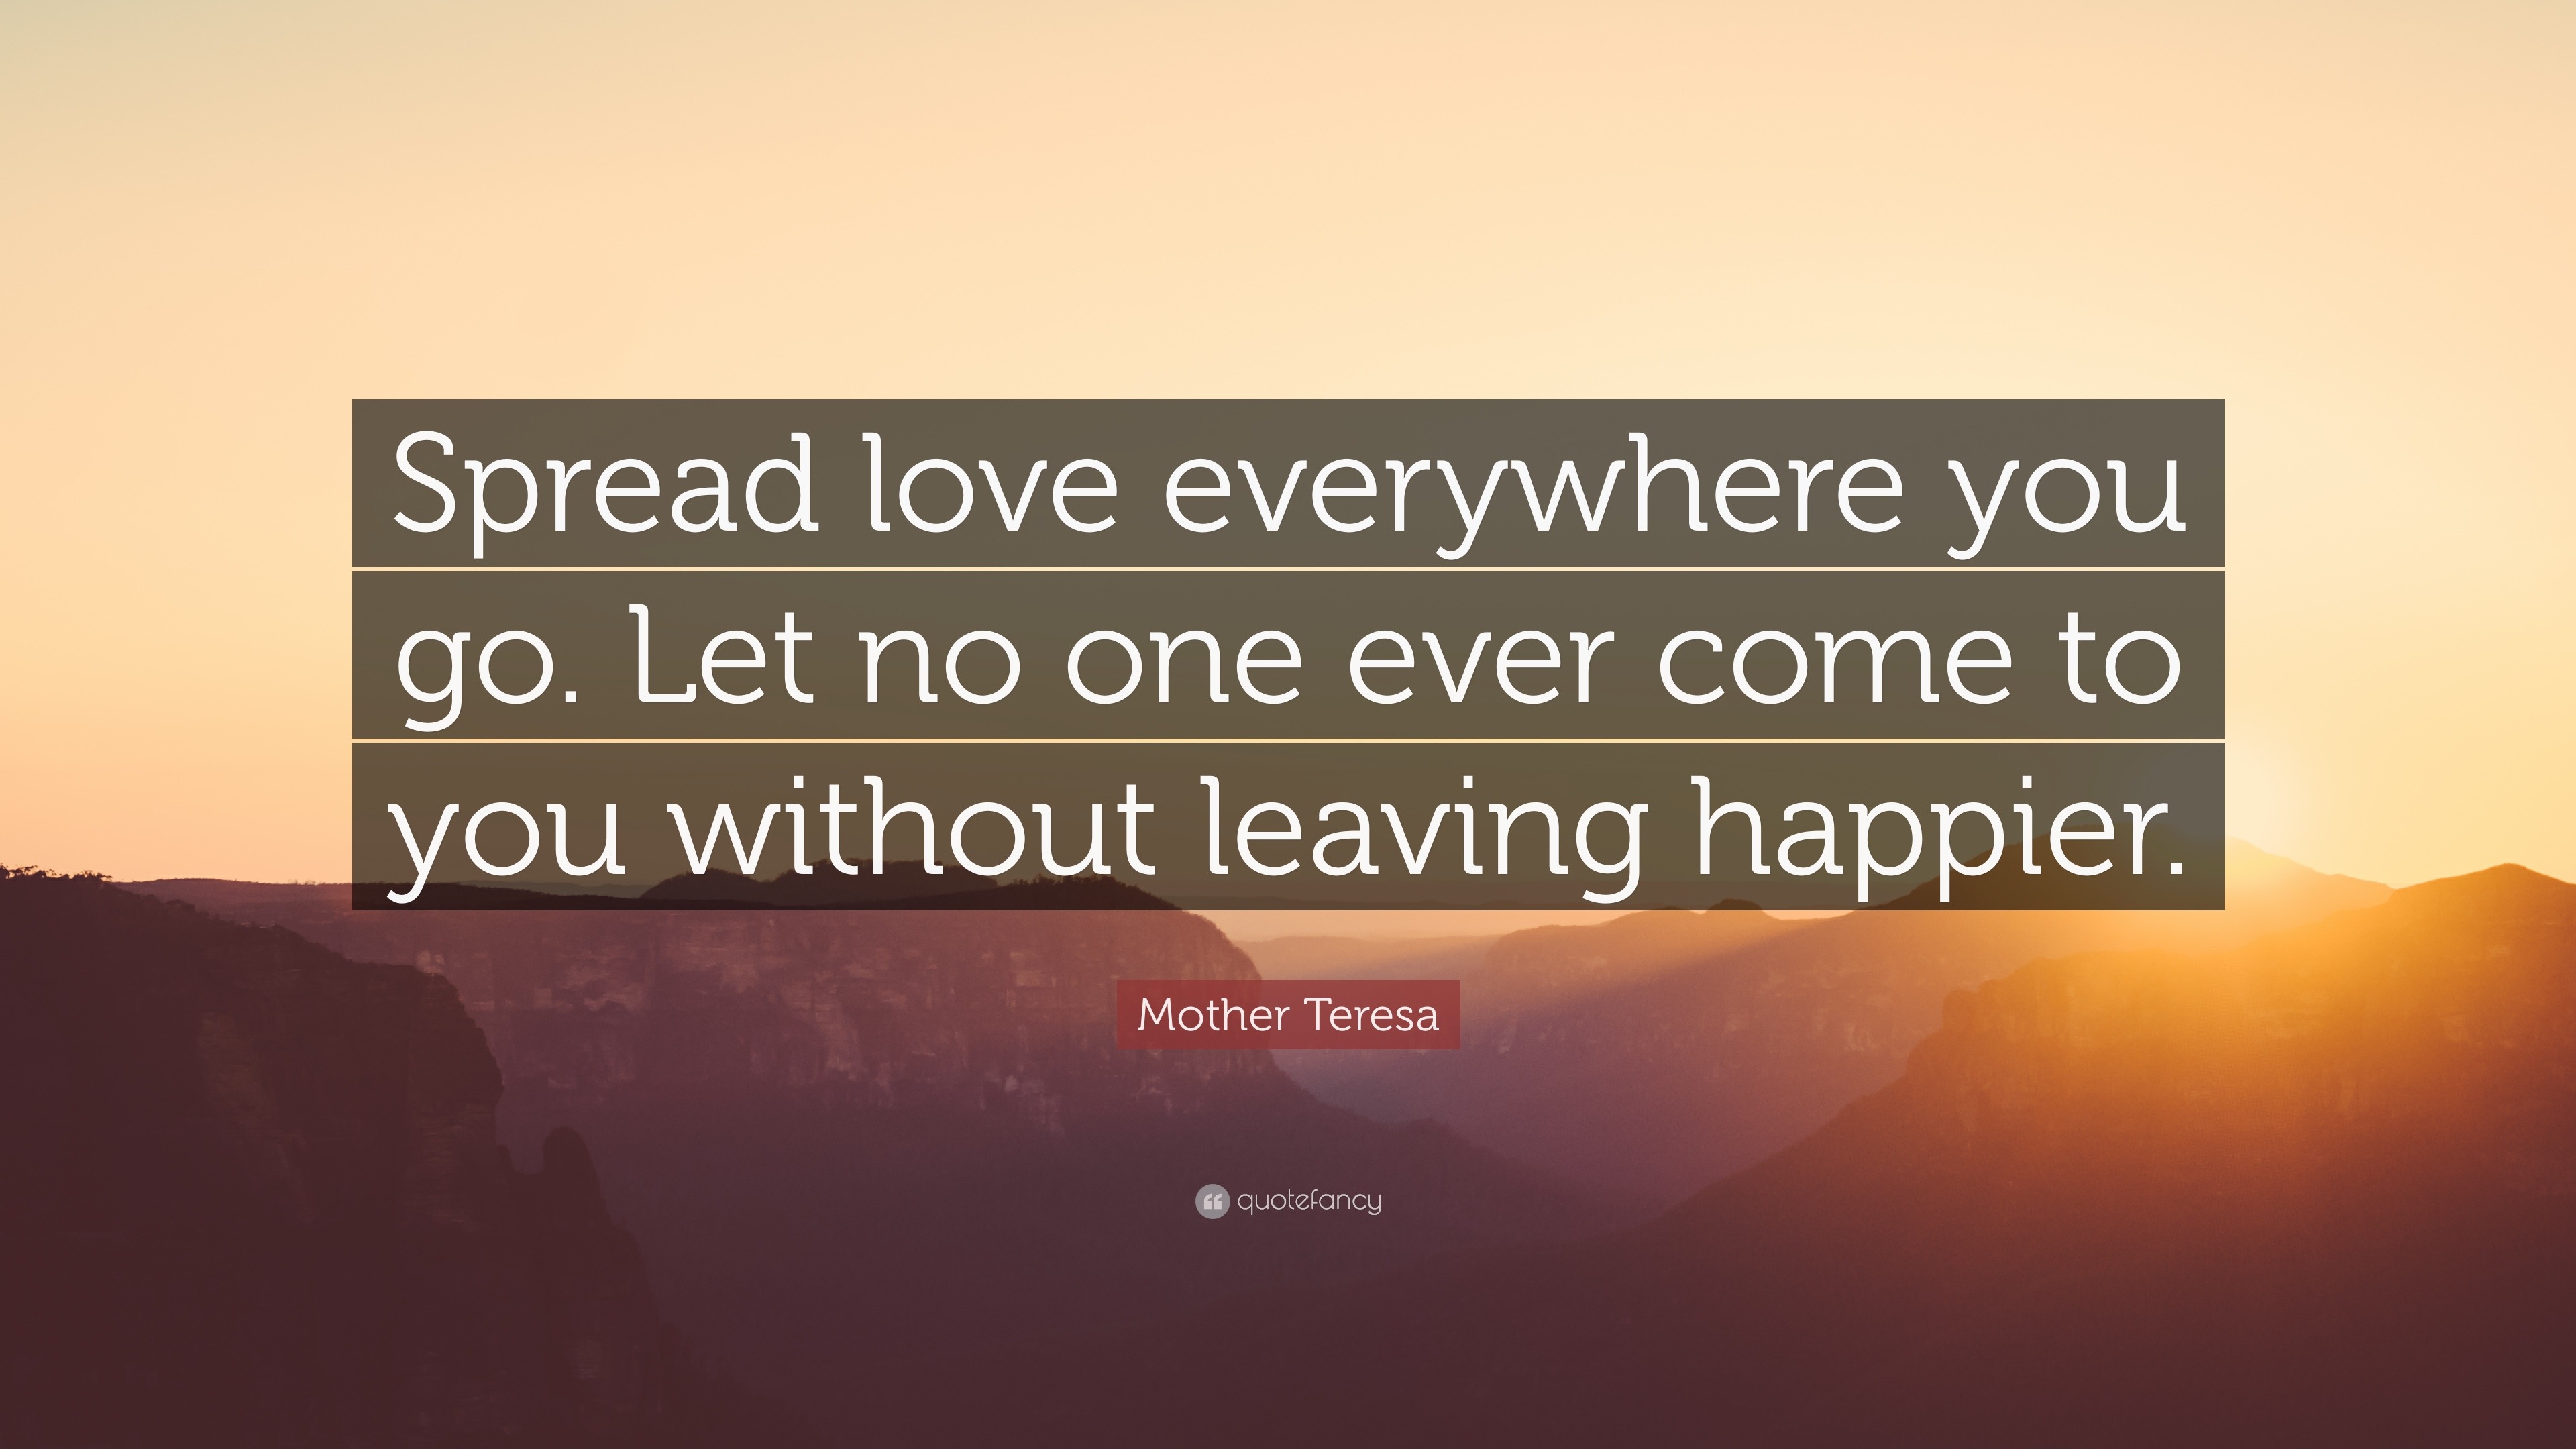 Mother Teresa Quote: “Spread love everywhere you go. Let no one ever